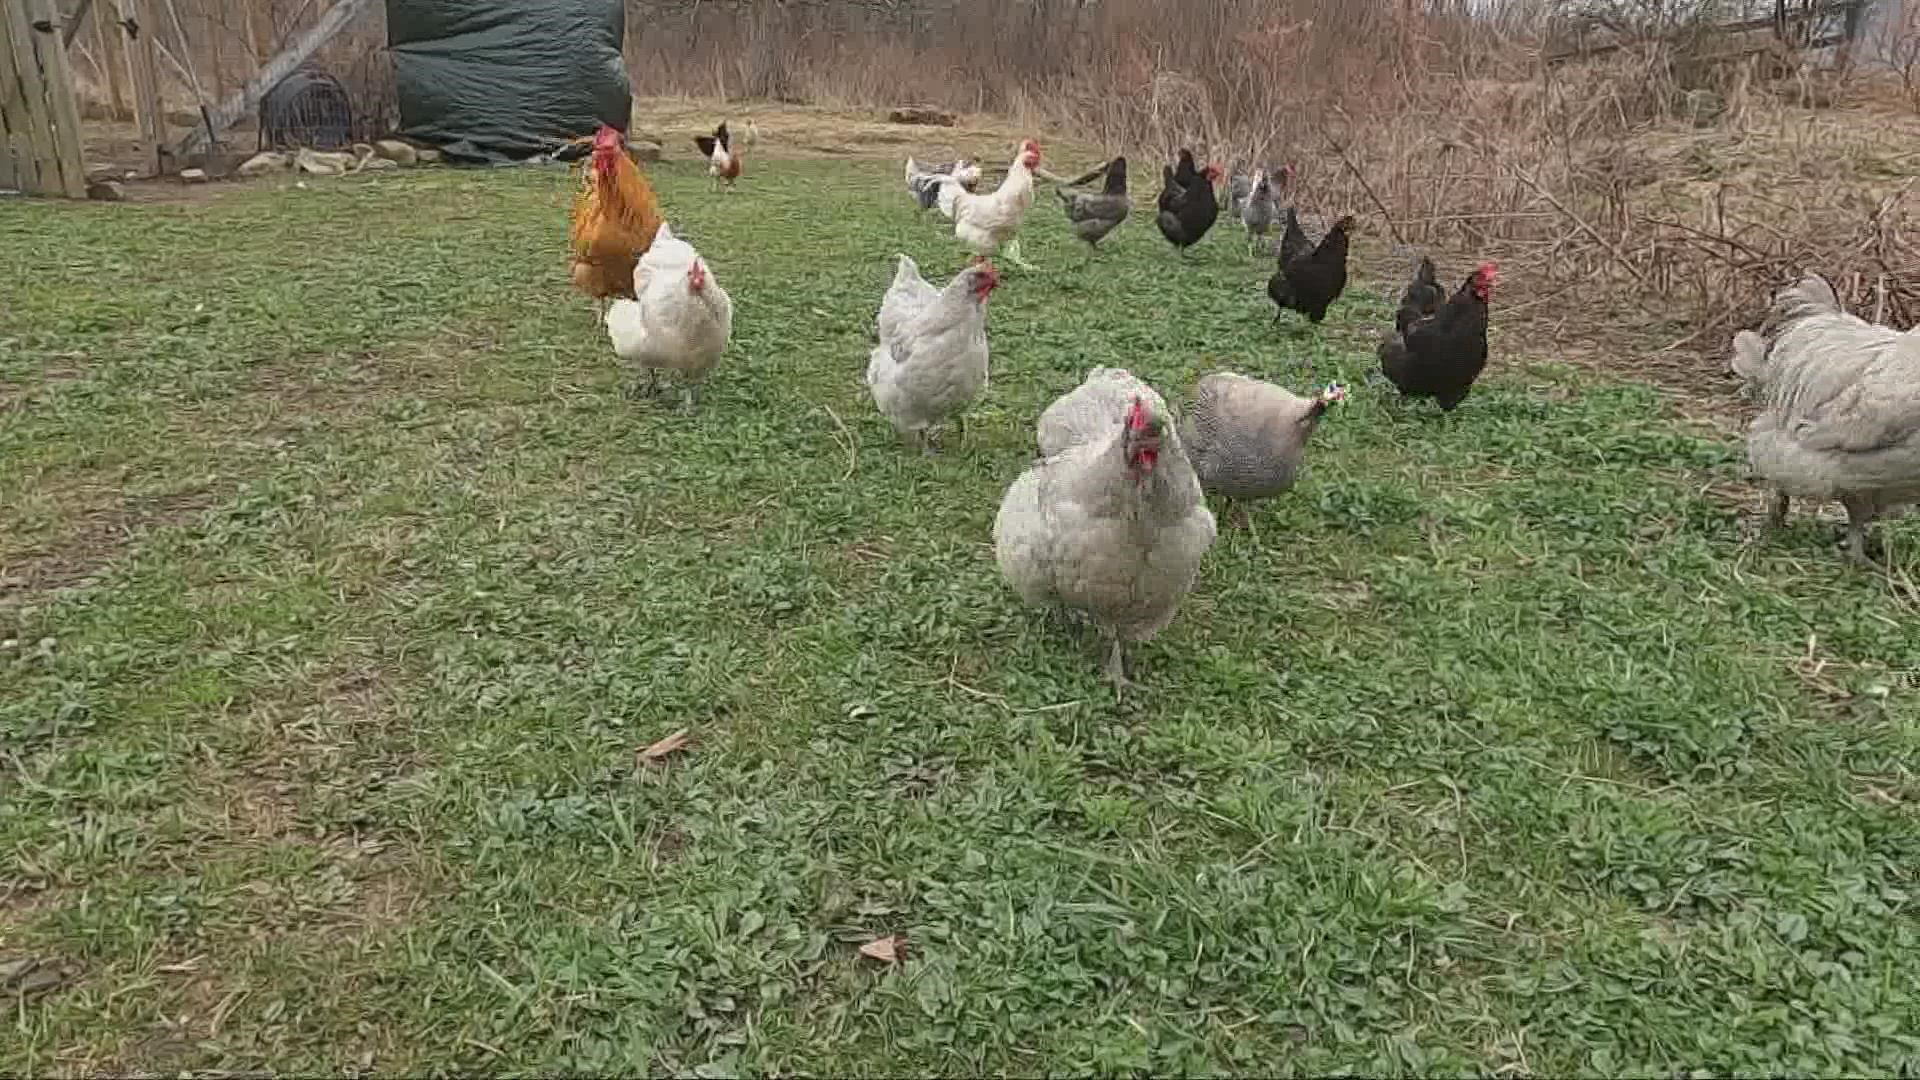 3News' Isabel Lawrence checked in with local experts and farmers to learn how they're protecting their flocks.